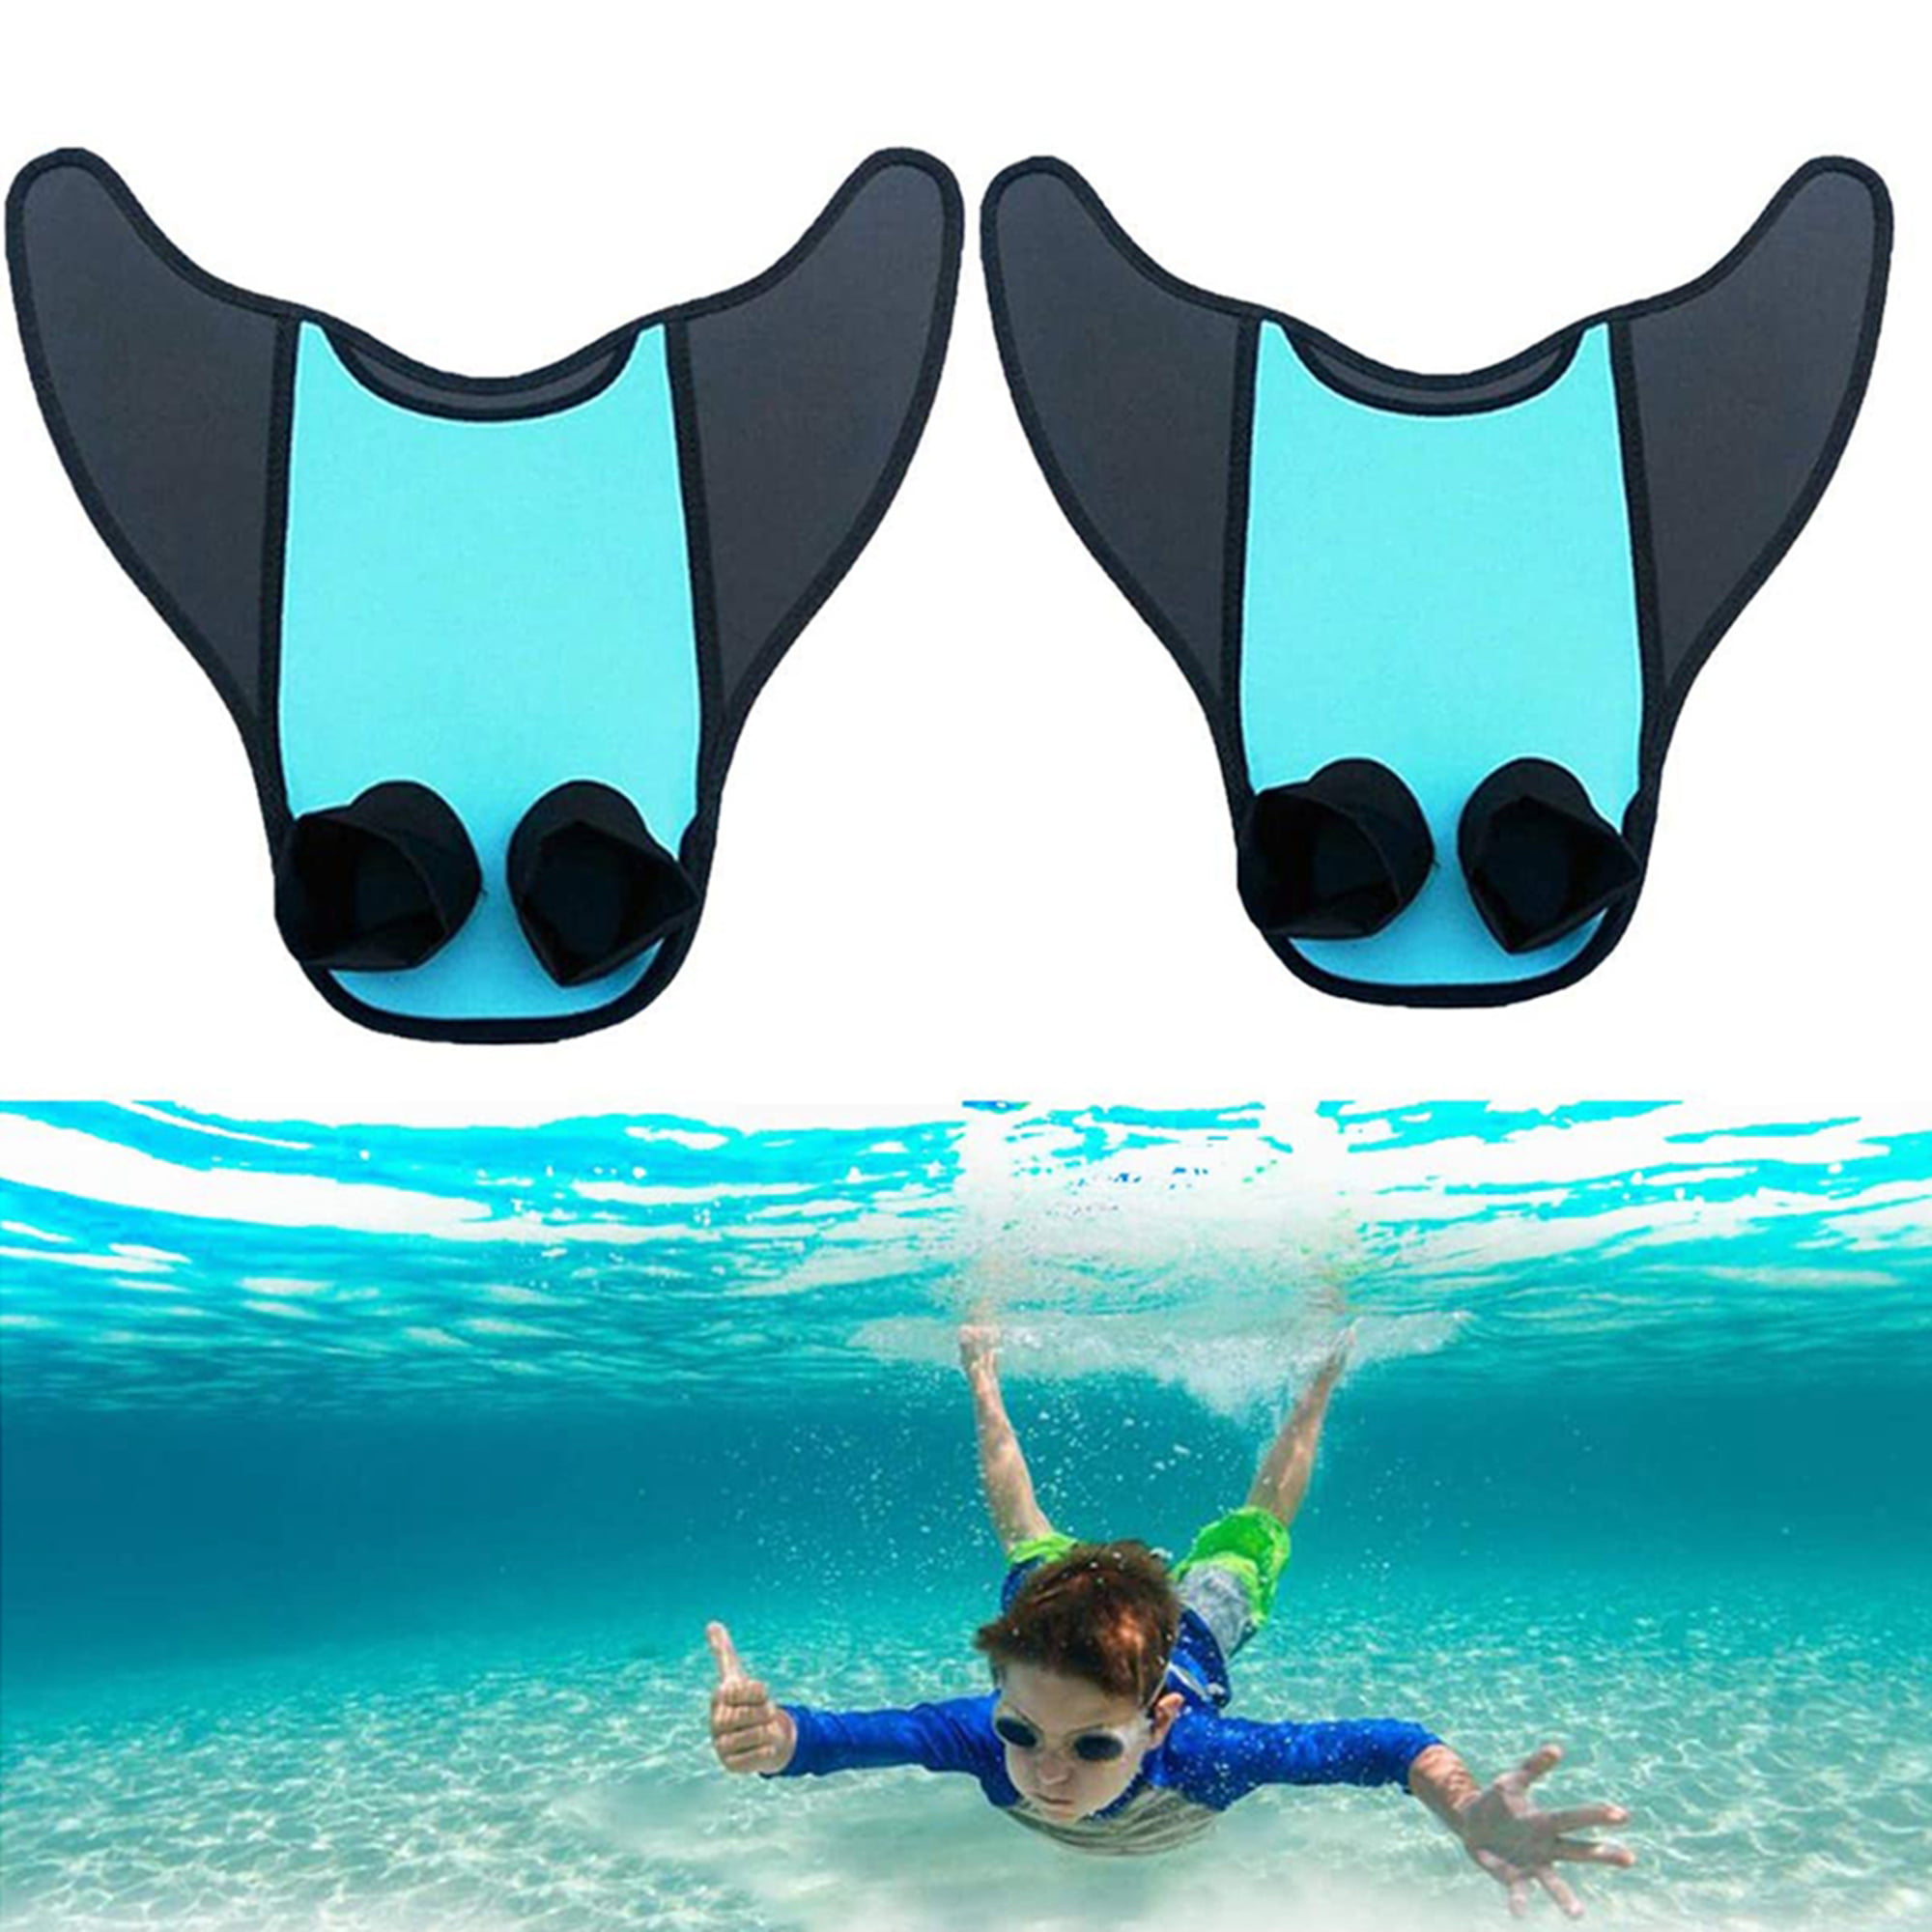 Mermaid Monofin Swim Fin For Kids And Adults Diving Mermaid Fins Foot Flipper Training Monofin Tail For Swimming One-Piece Flipper Swim Fins Swimming Training Fins Swim Fin Mermaid Monofin Tails